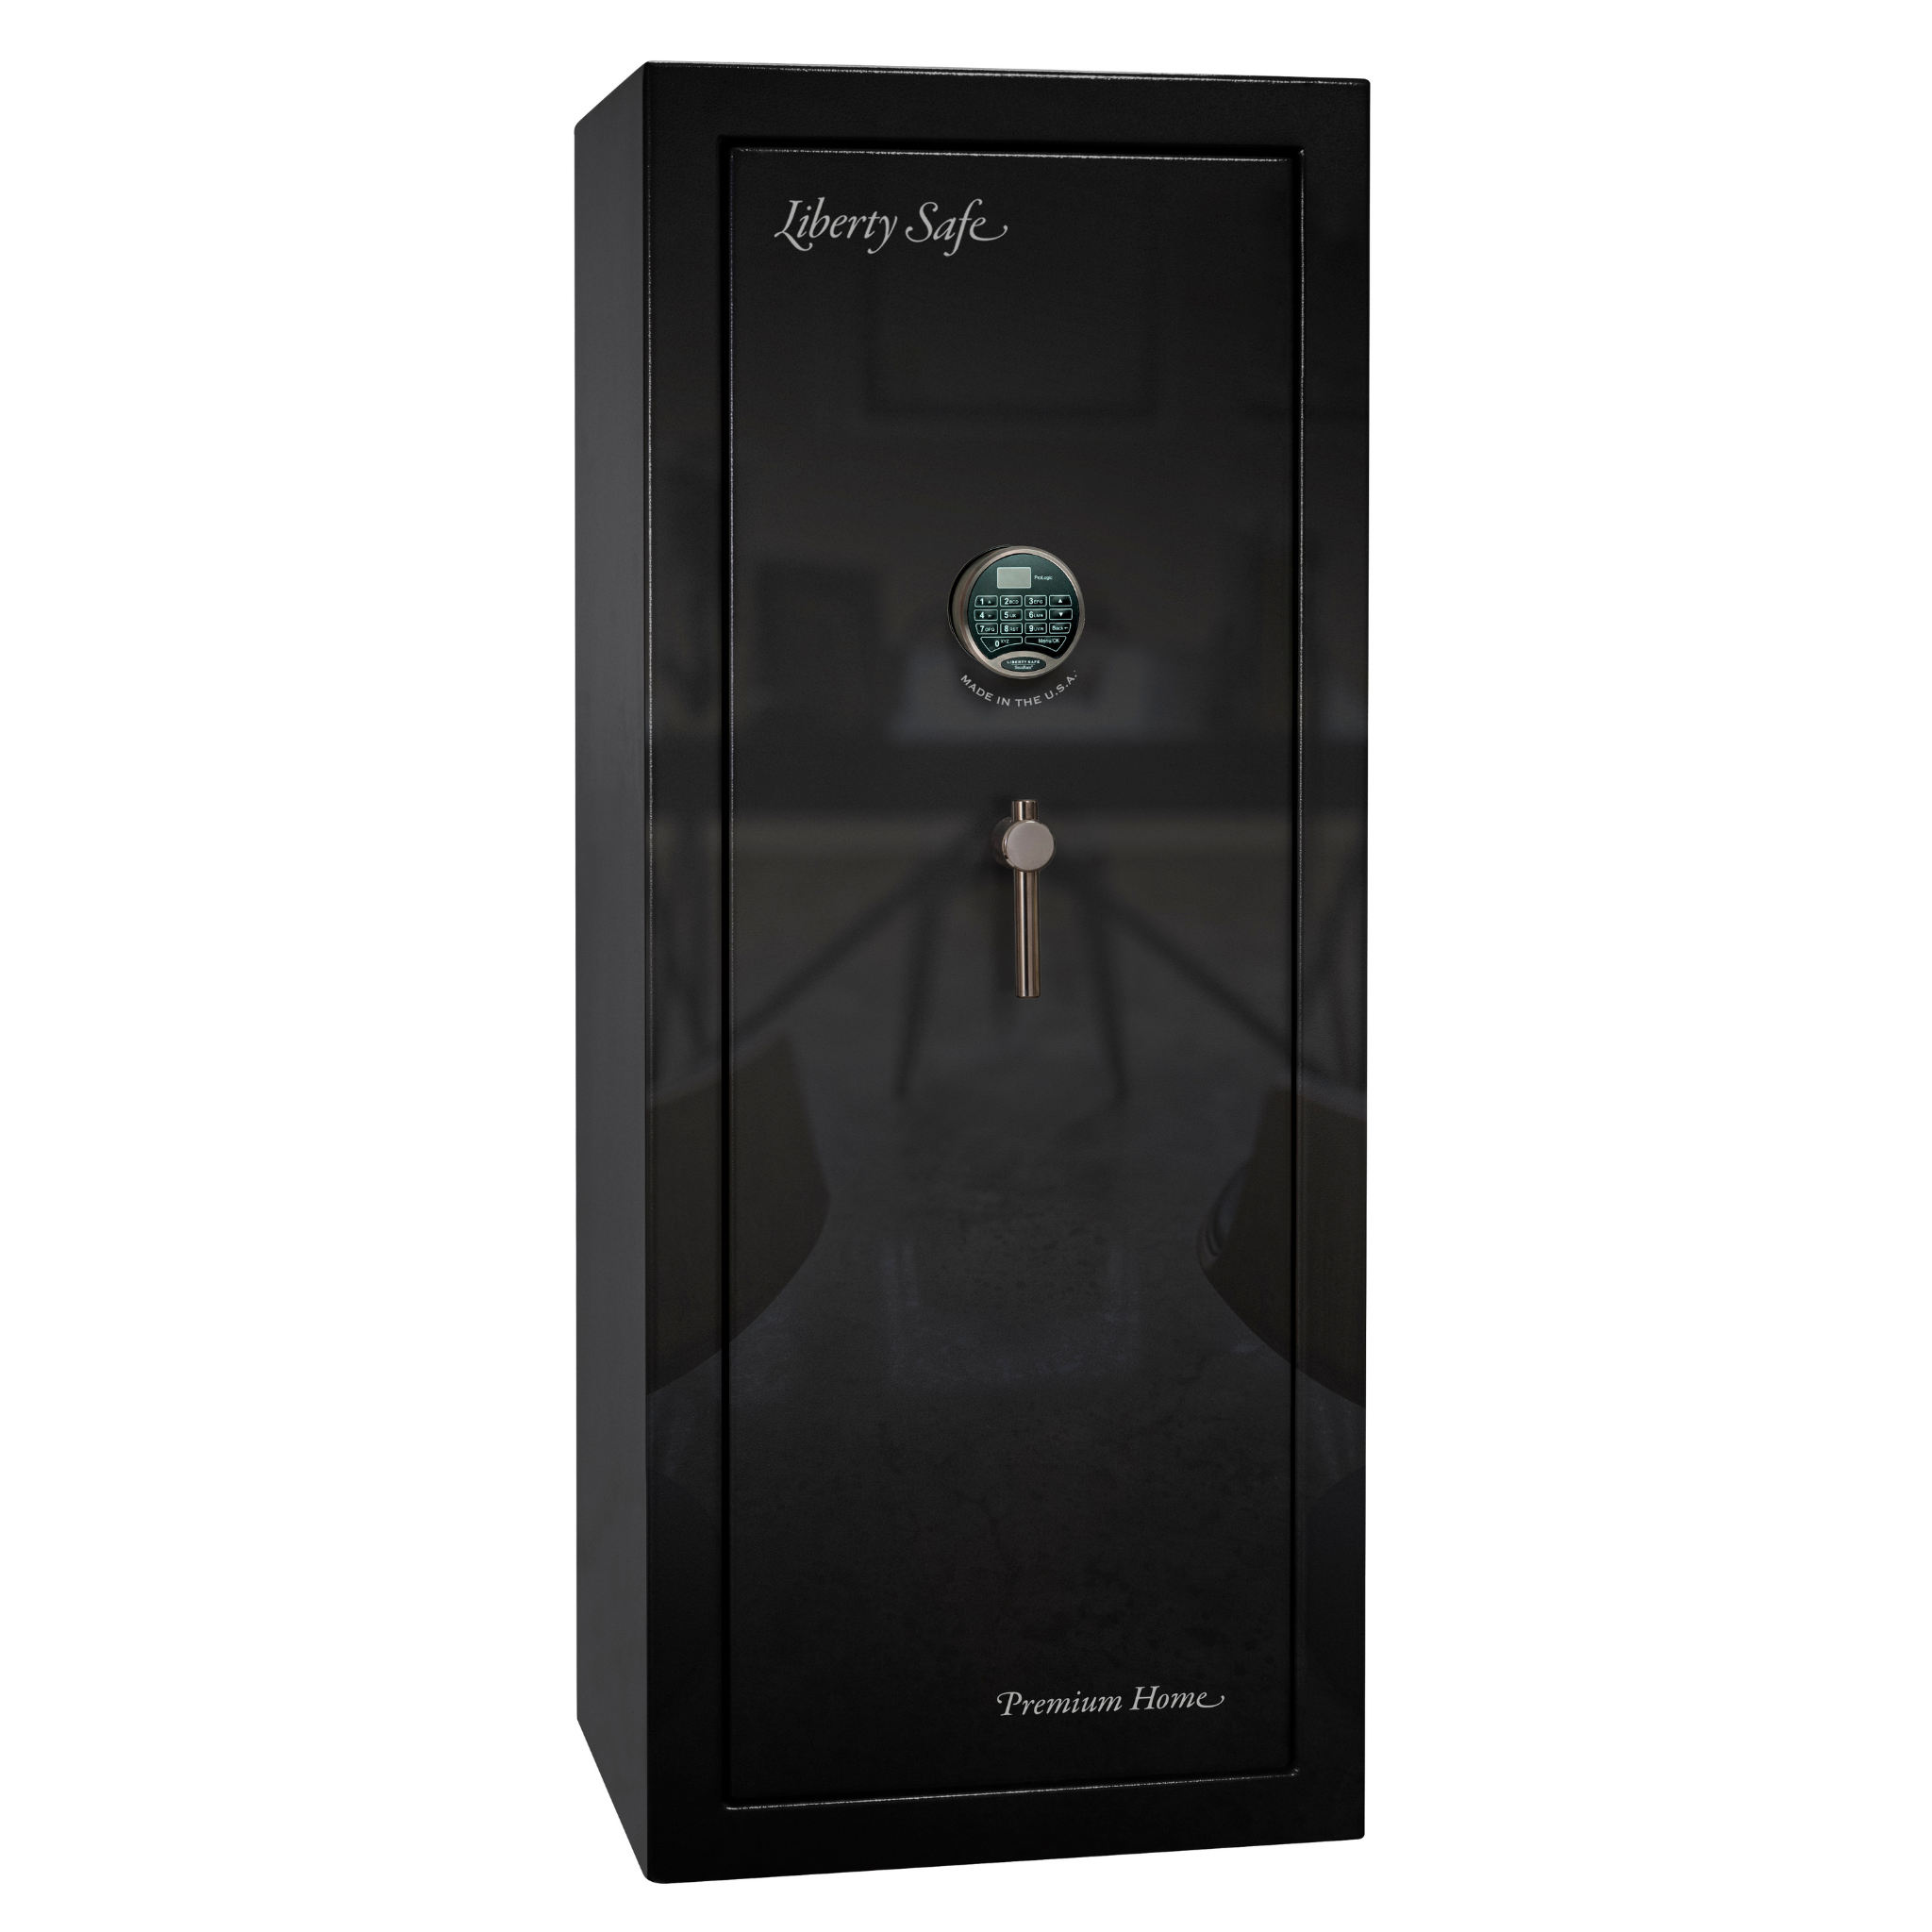 Premium Home Series | Level 7 Security | 2 Hour Fire Protection | 17 | Dimensions: 60.25"(H) x 24.5"(W) x 19"(D) | Black Gloss Black Chrome - Closed Door